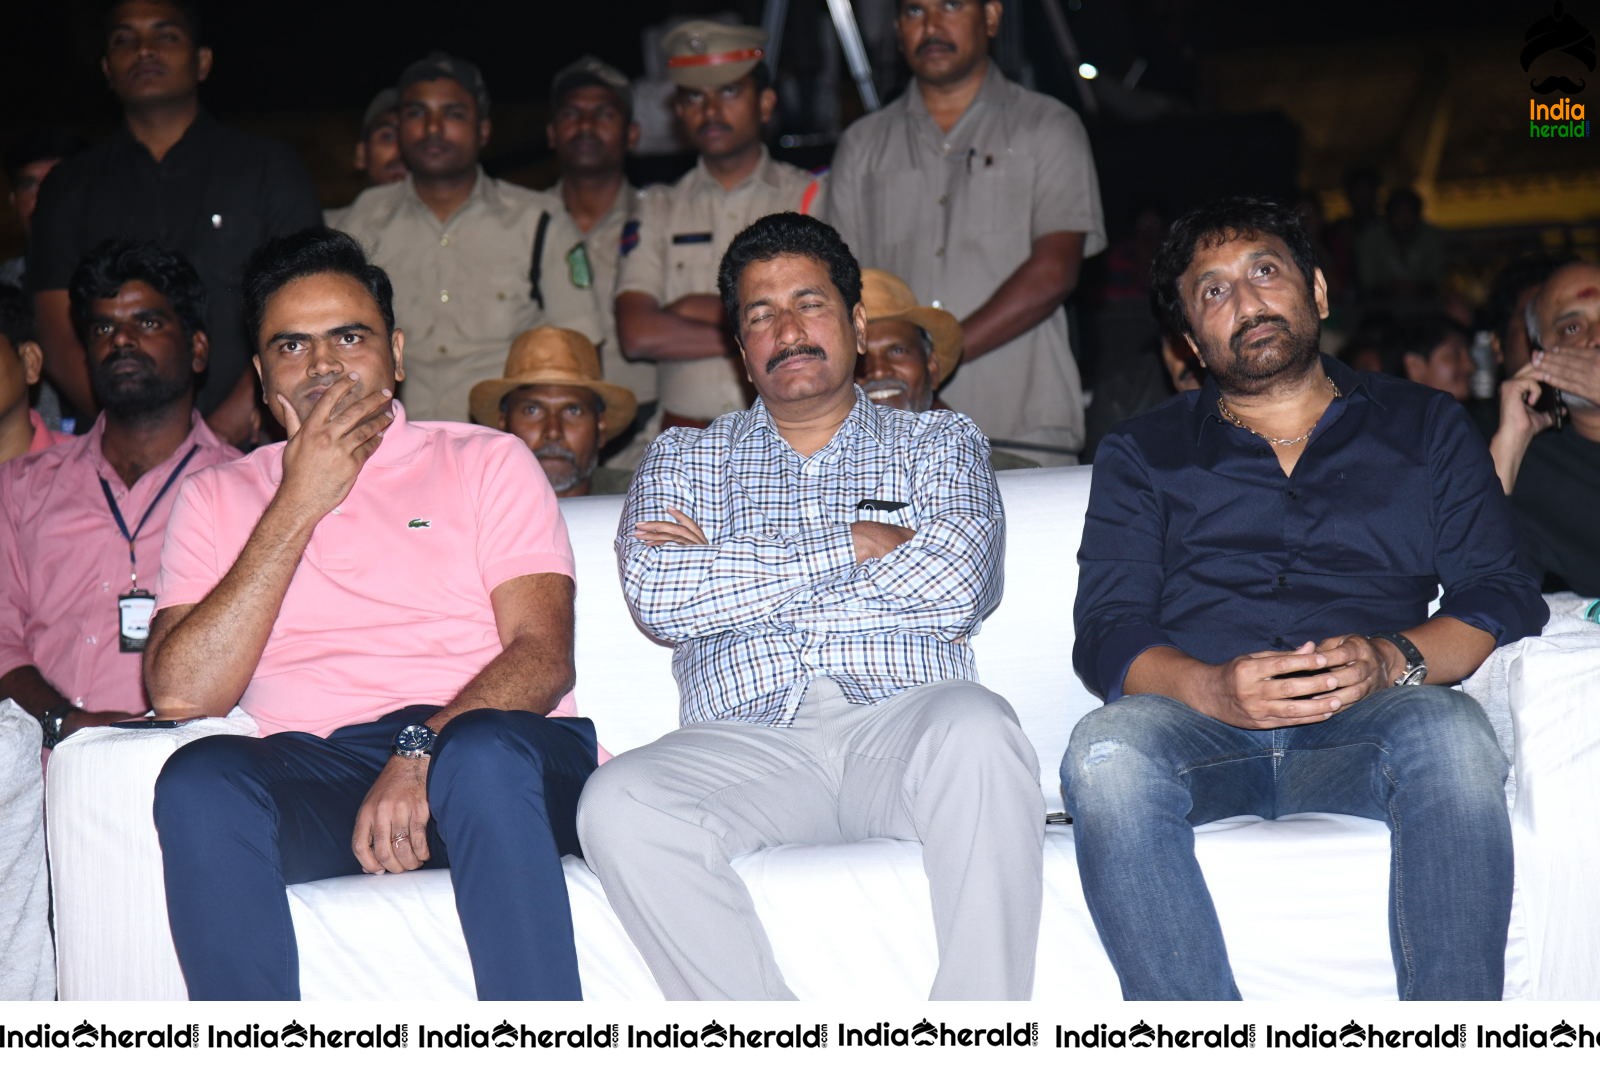 Some More Candid moments from Sarileru Neekevvaru event Set 1